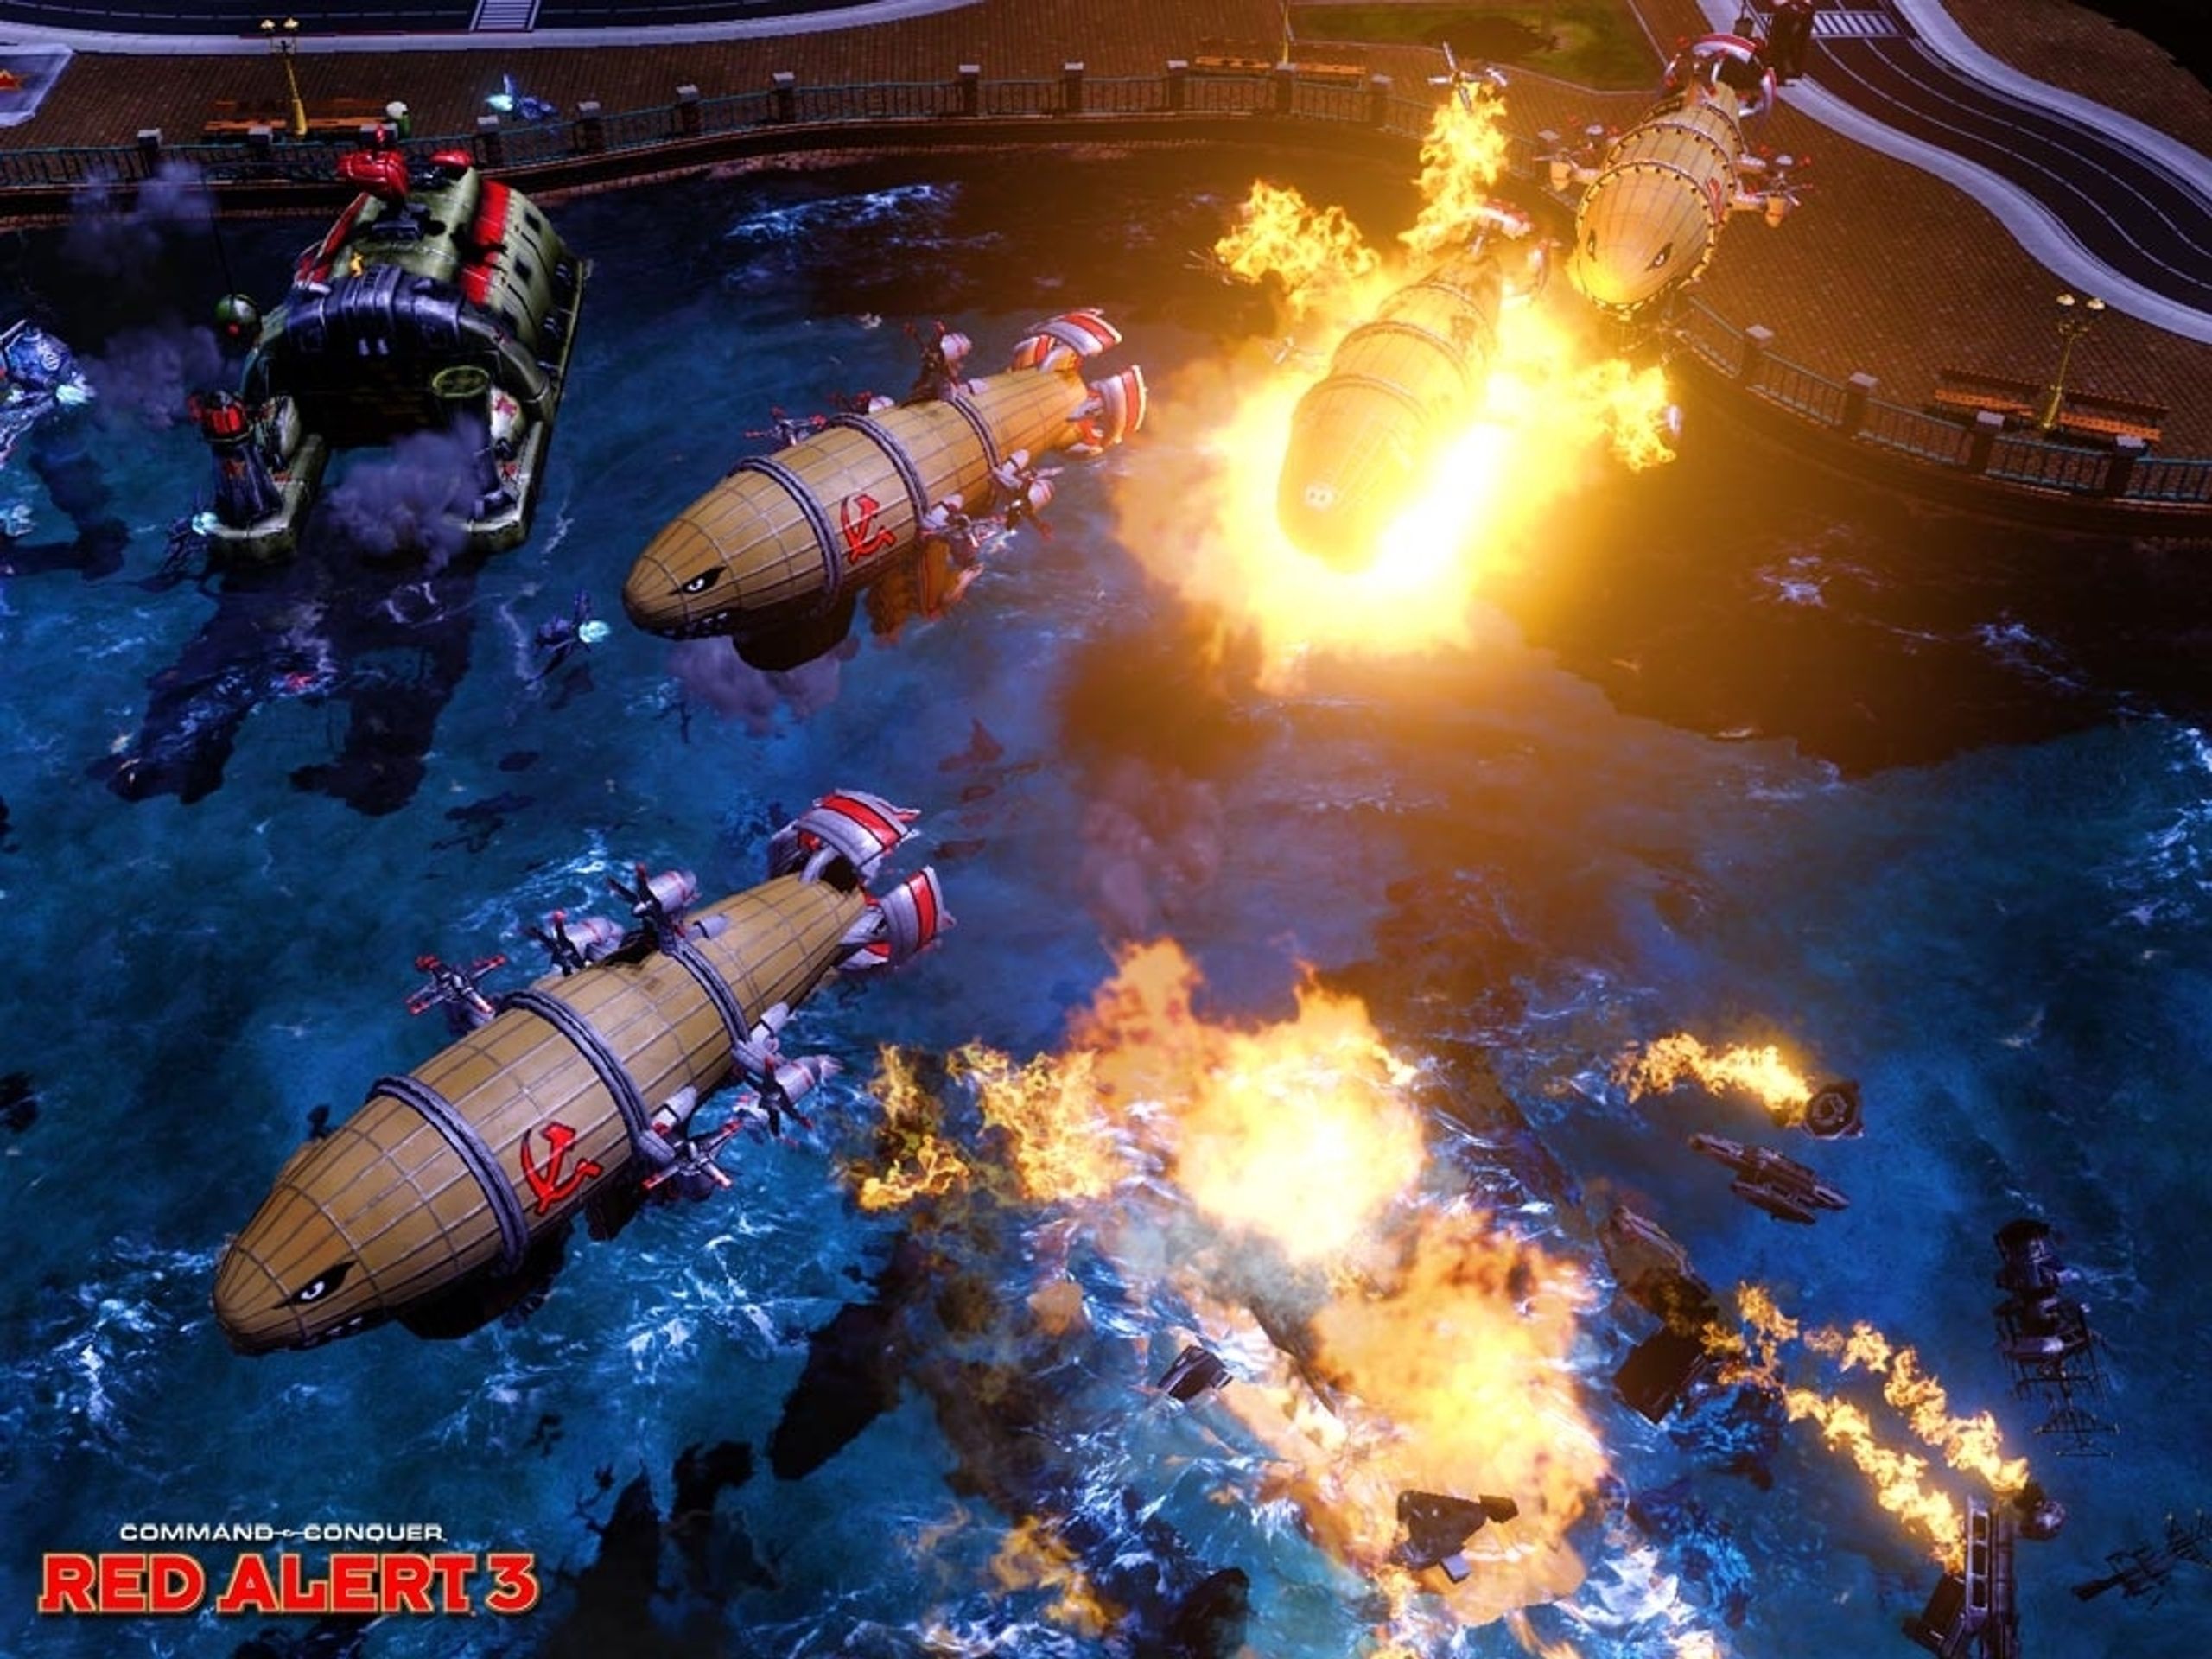 Command & Conquer: Red Alert 3 - Red Alert 3 galerie (9/16)